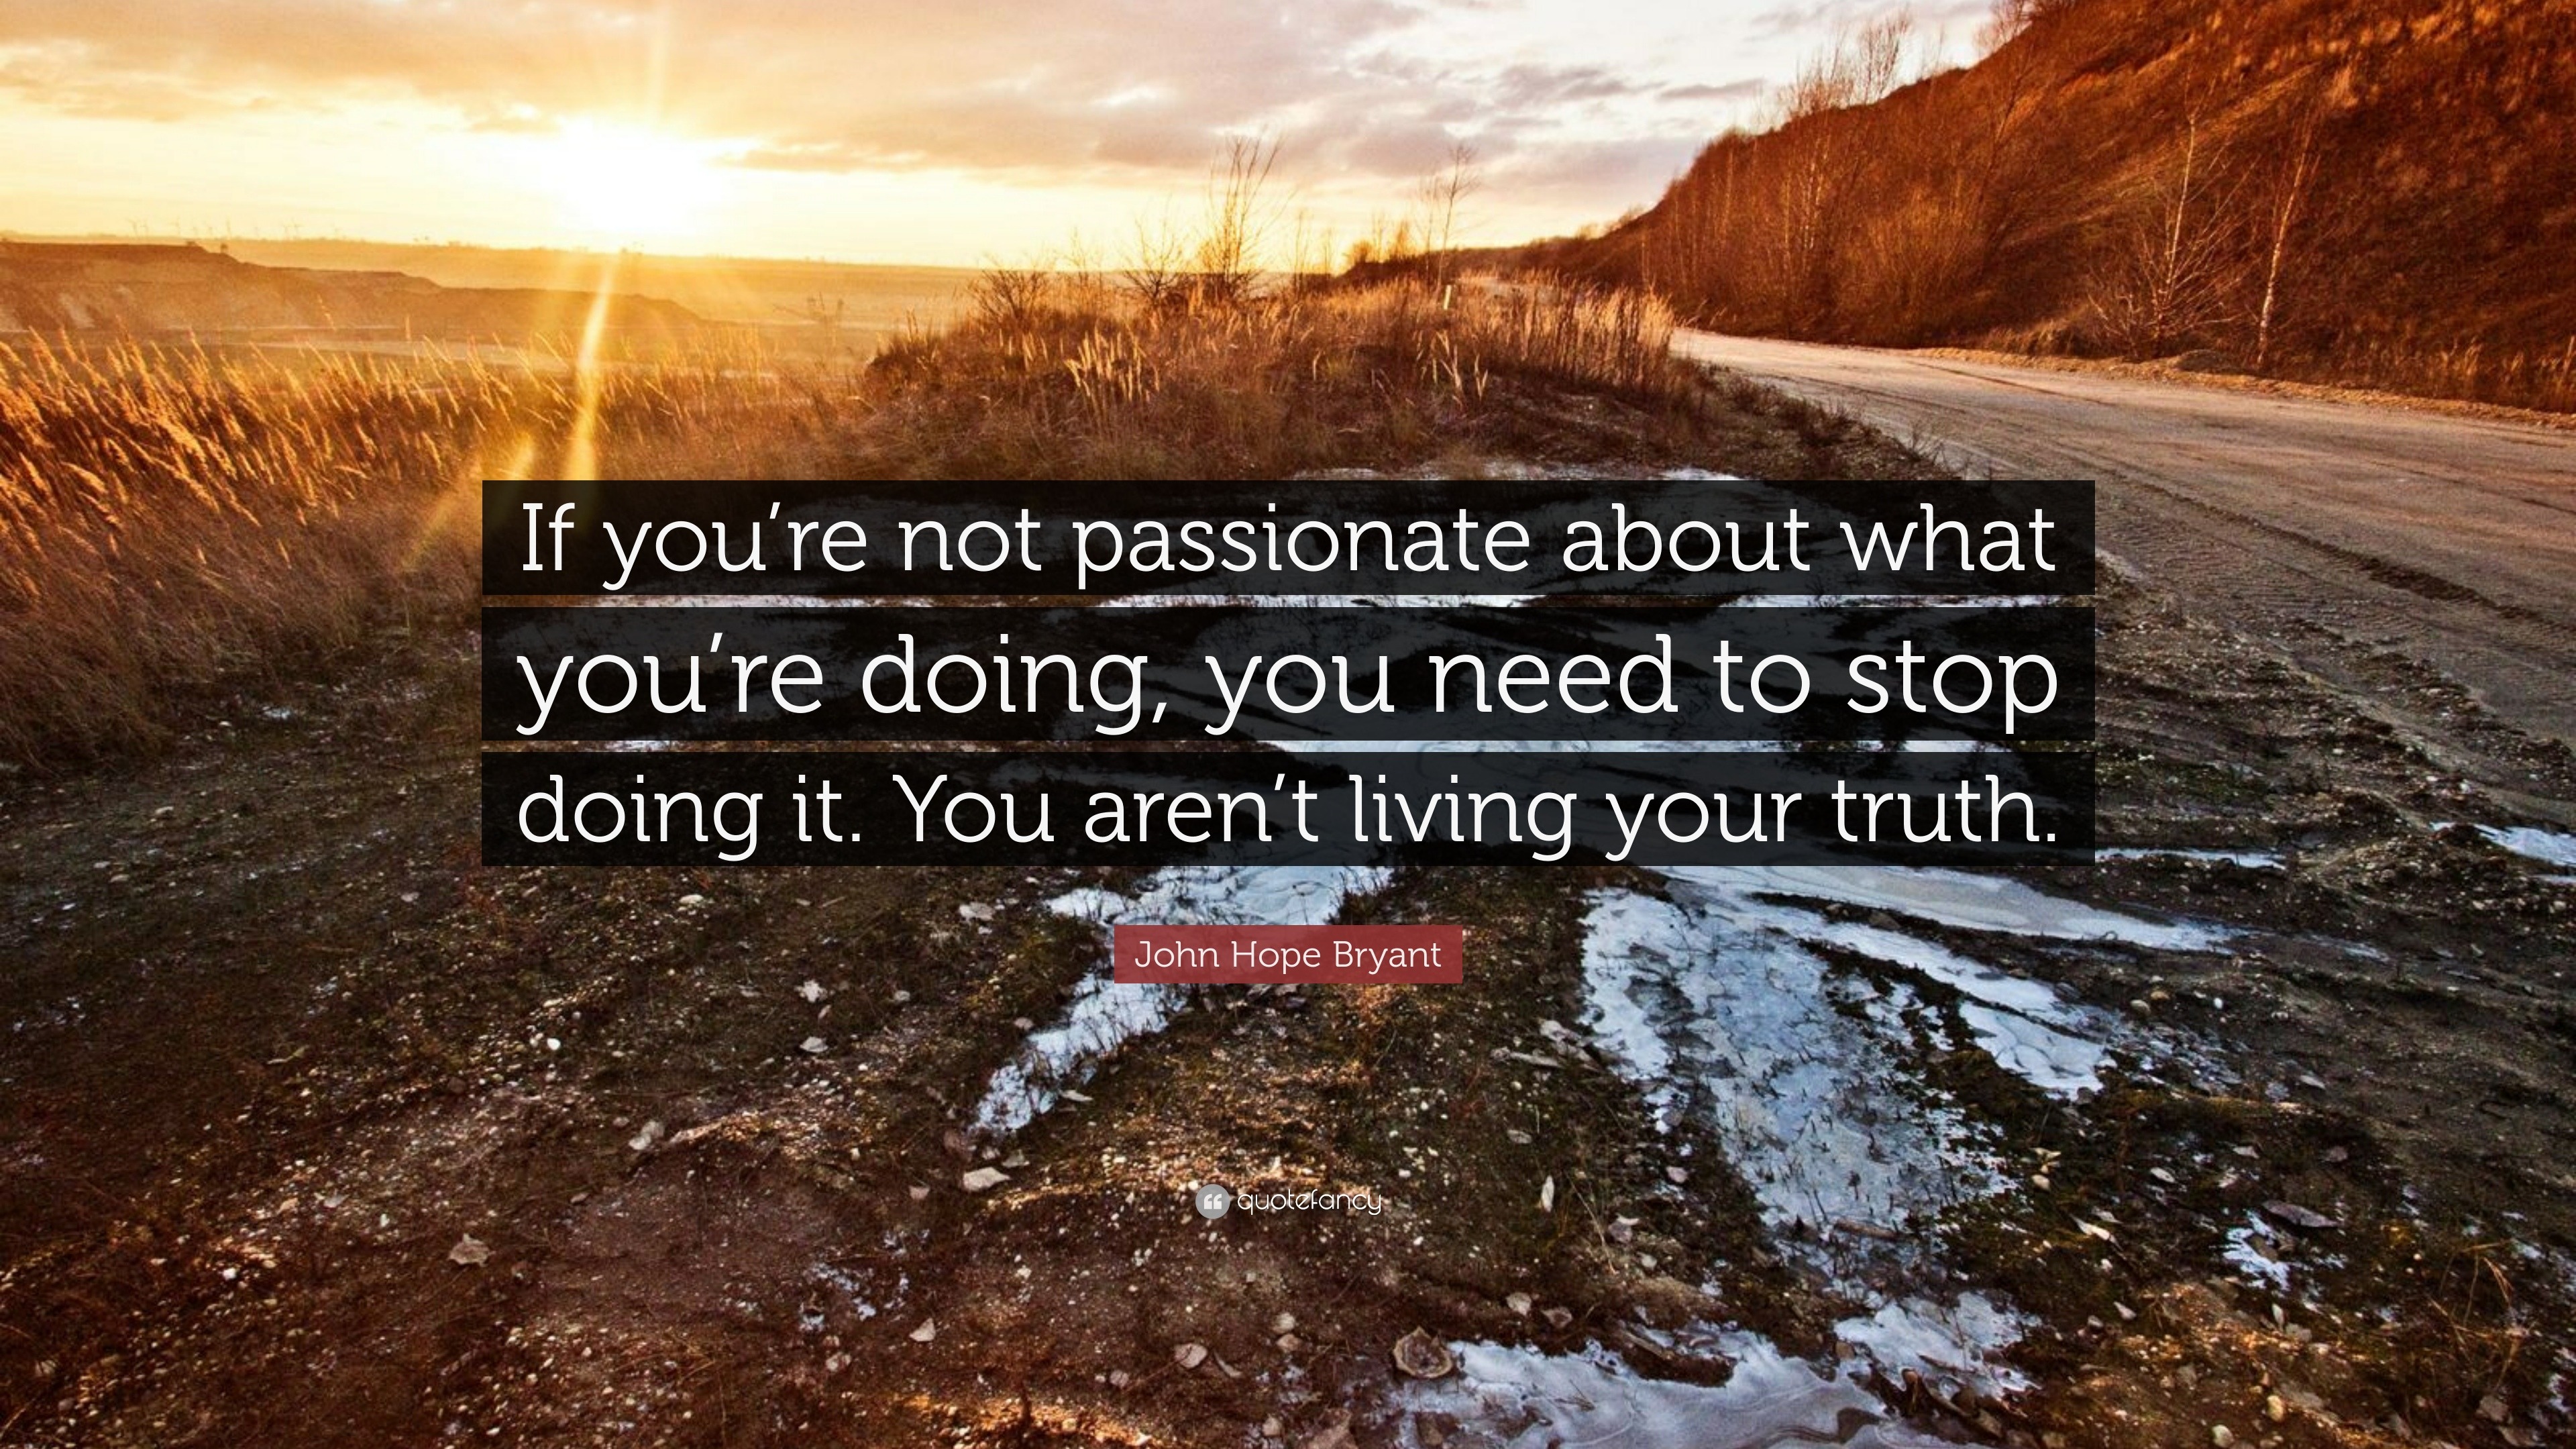 John Hope Bryant Quote: “If you’re not passionate about what you’re ...